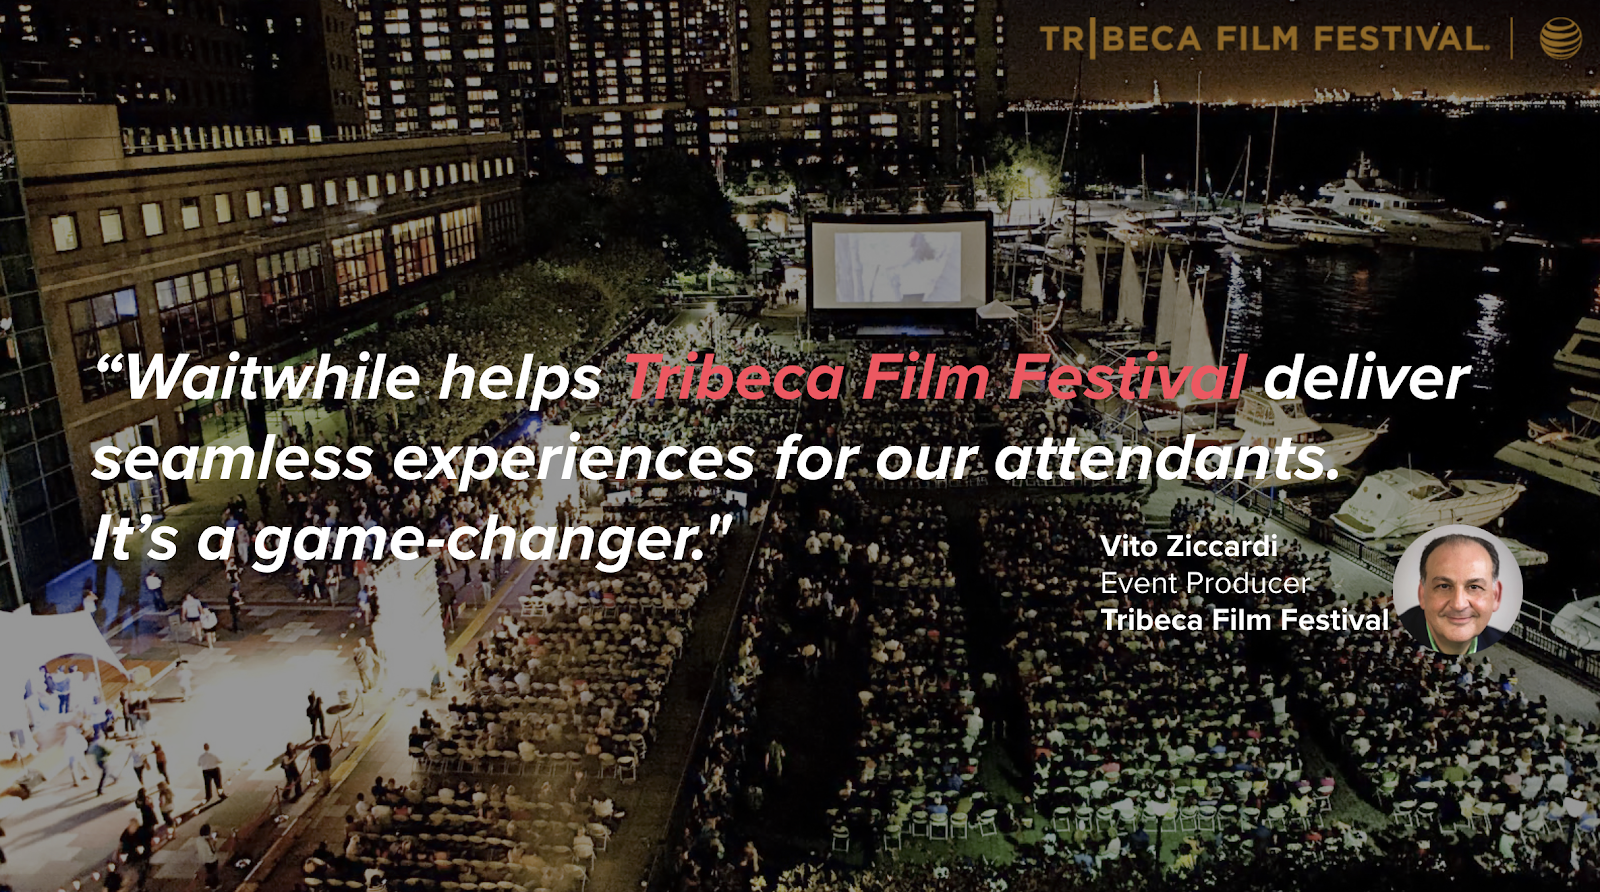 Tribeca Film Festival crowd from a distance photo with a quote overlaying the image